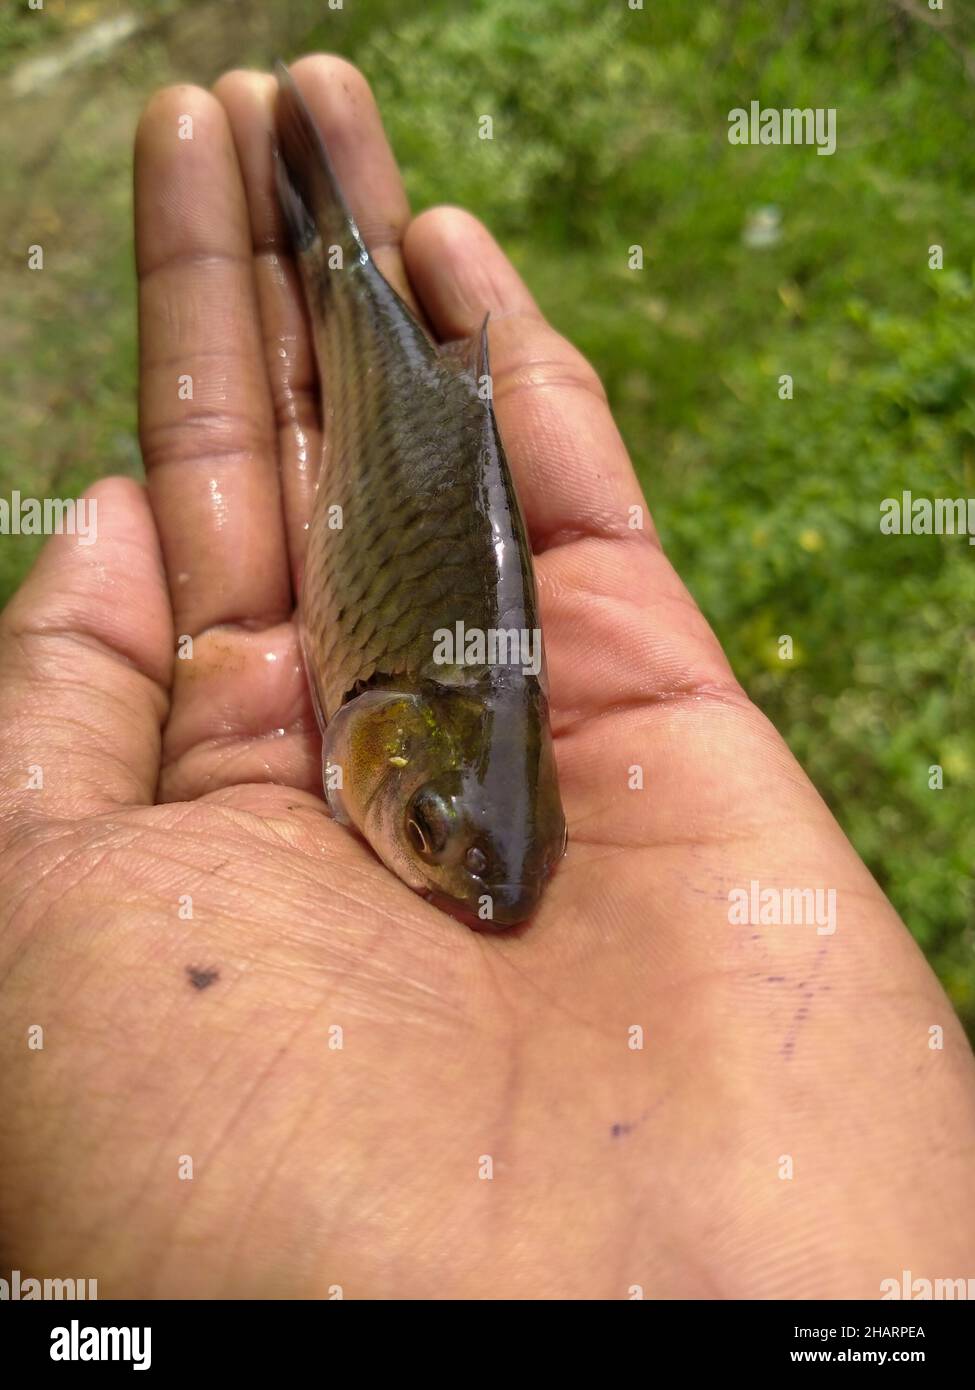 Vertical shot of a hand holding an alive fish Stock Photo